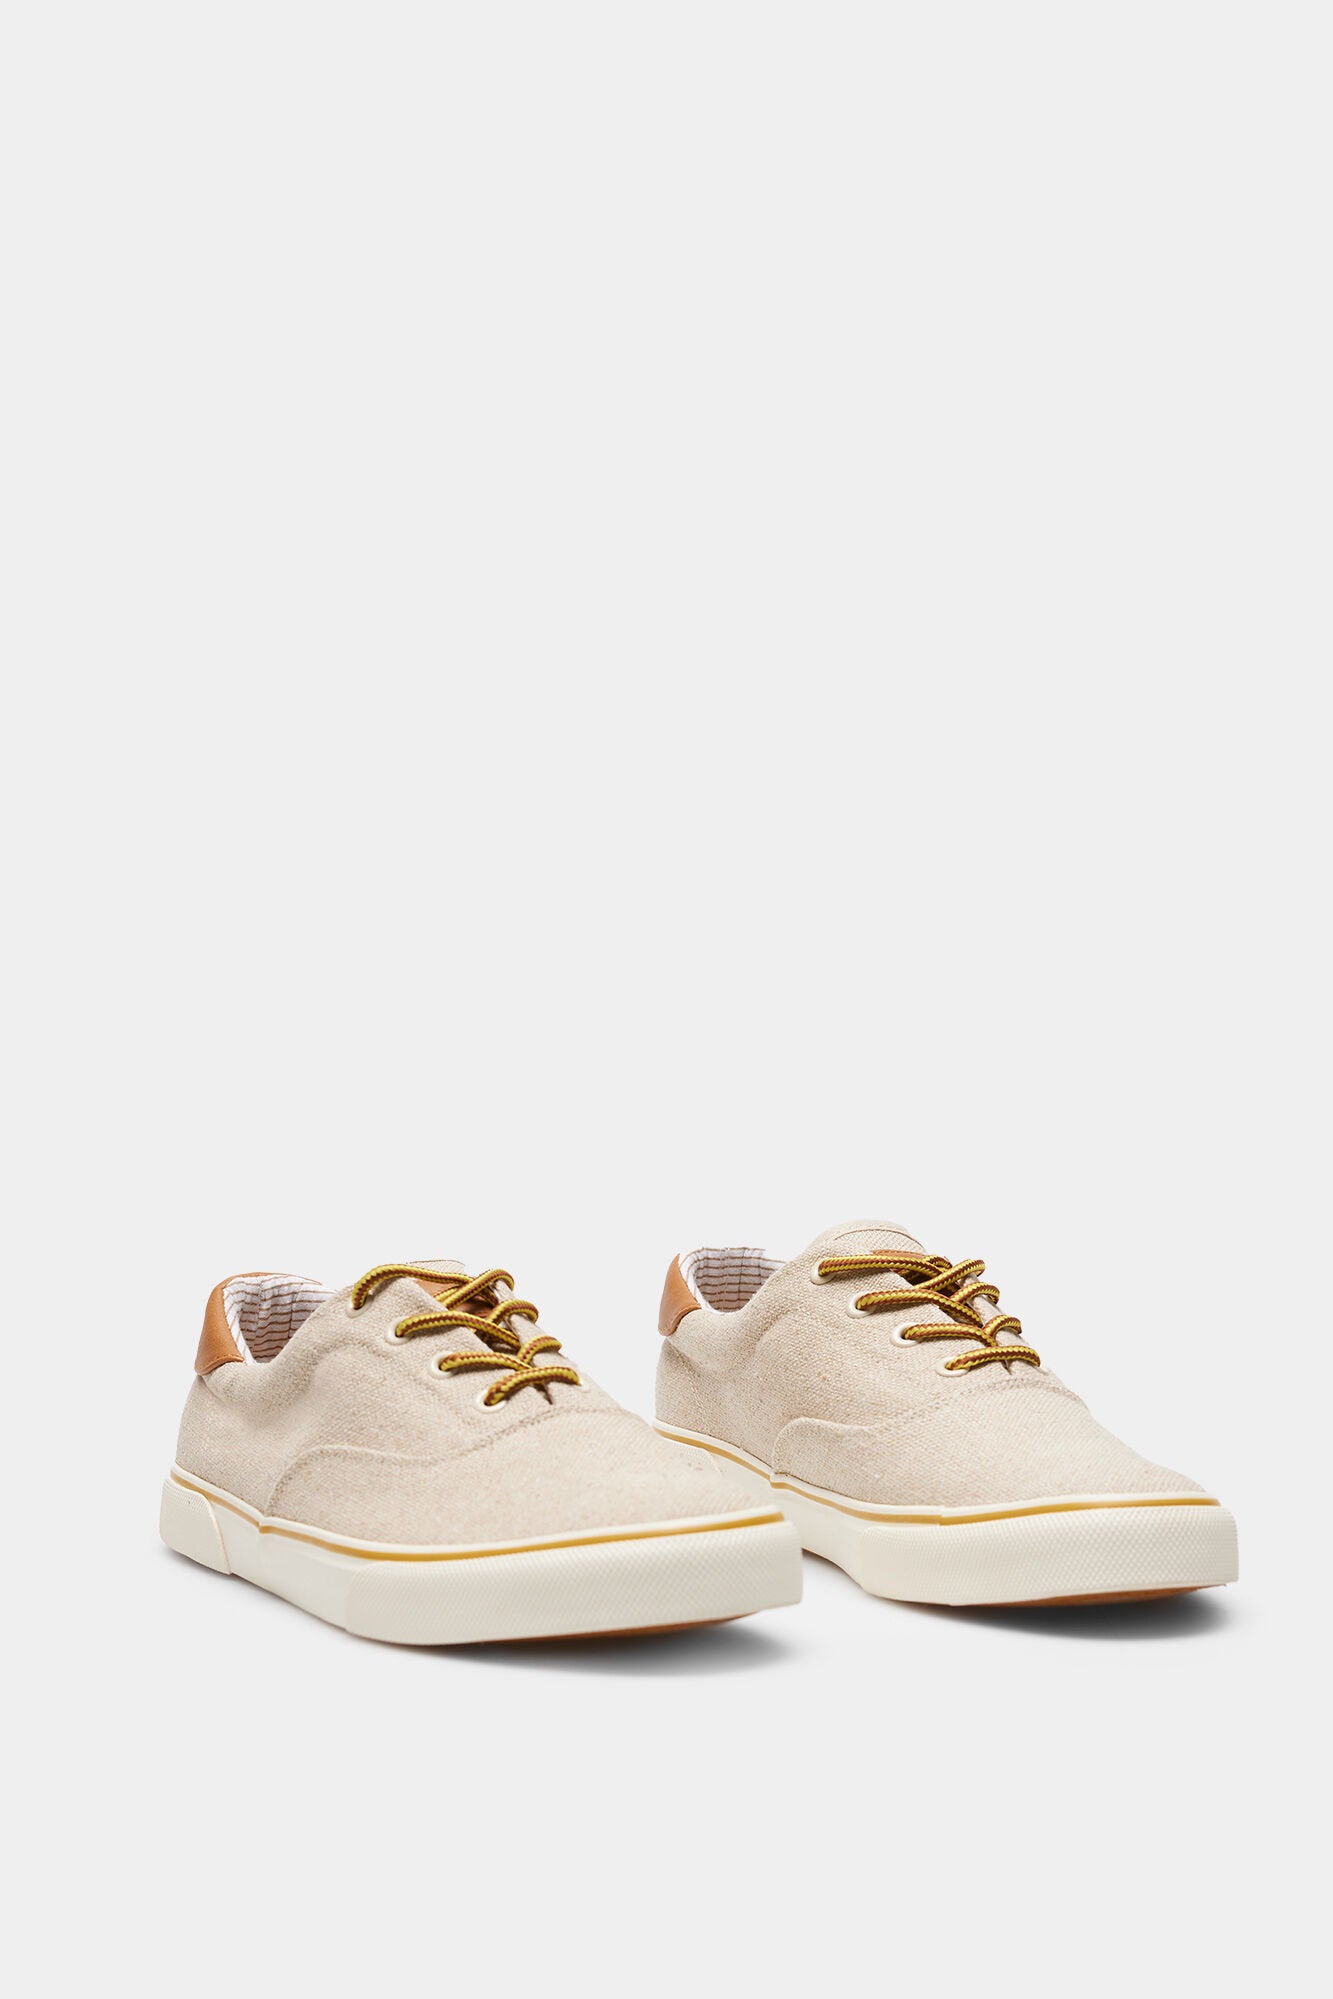 Beige And Brown Lace Up Trainers_2997585_97_03